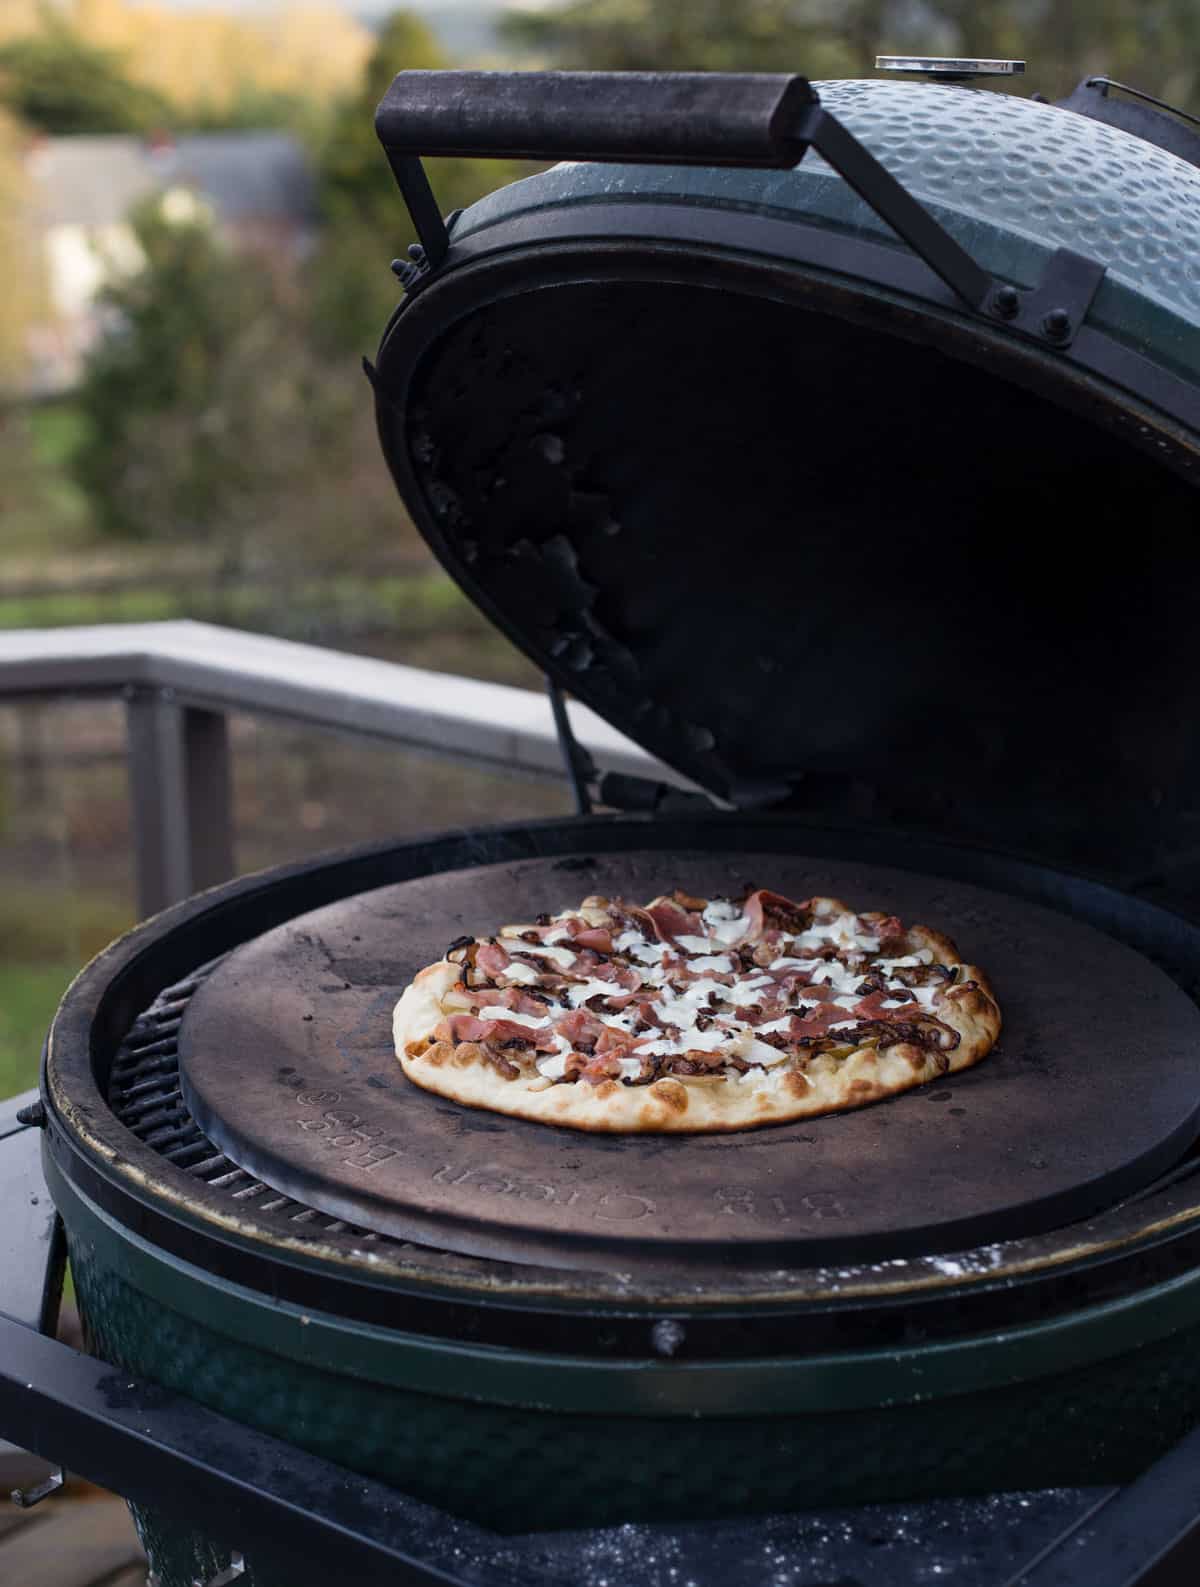 A pizza grilling on a Big Green Egg grill